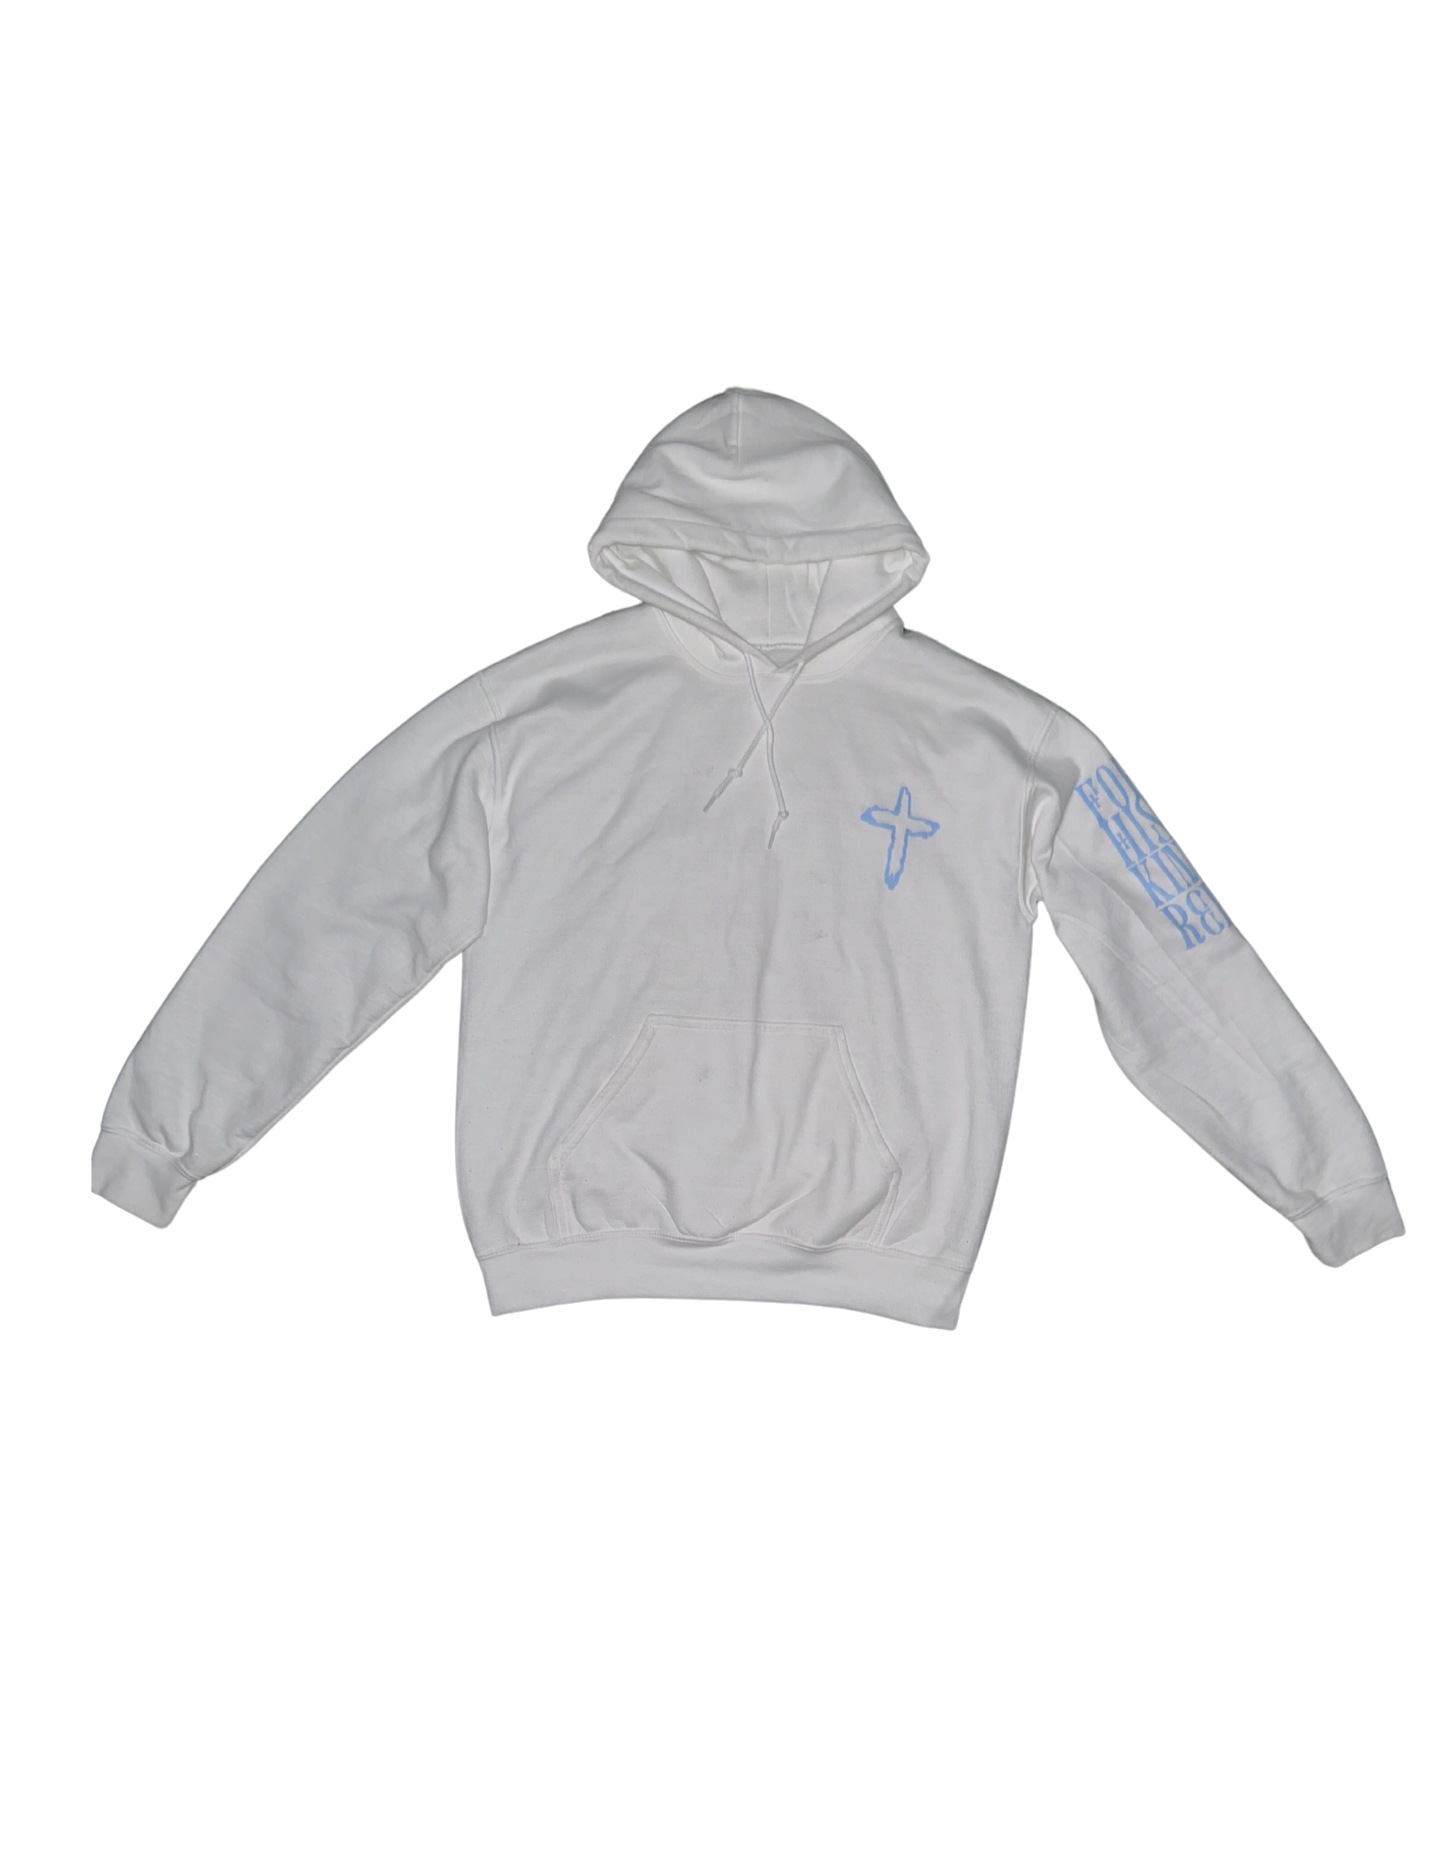 Our God Reigns White Hoodie